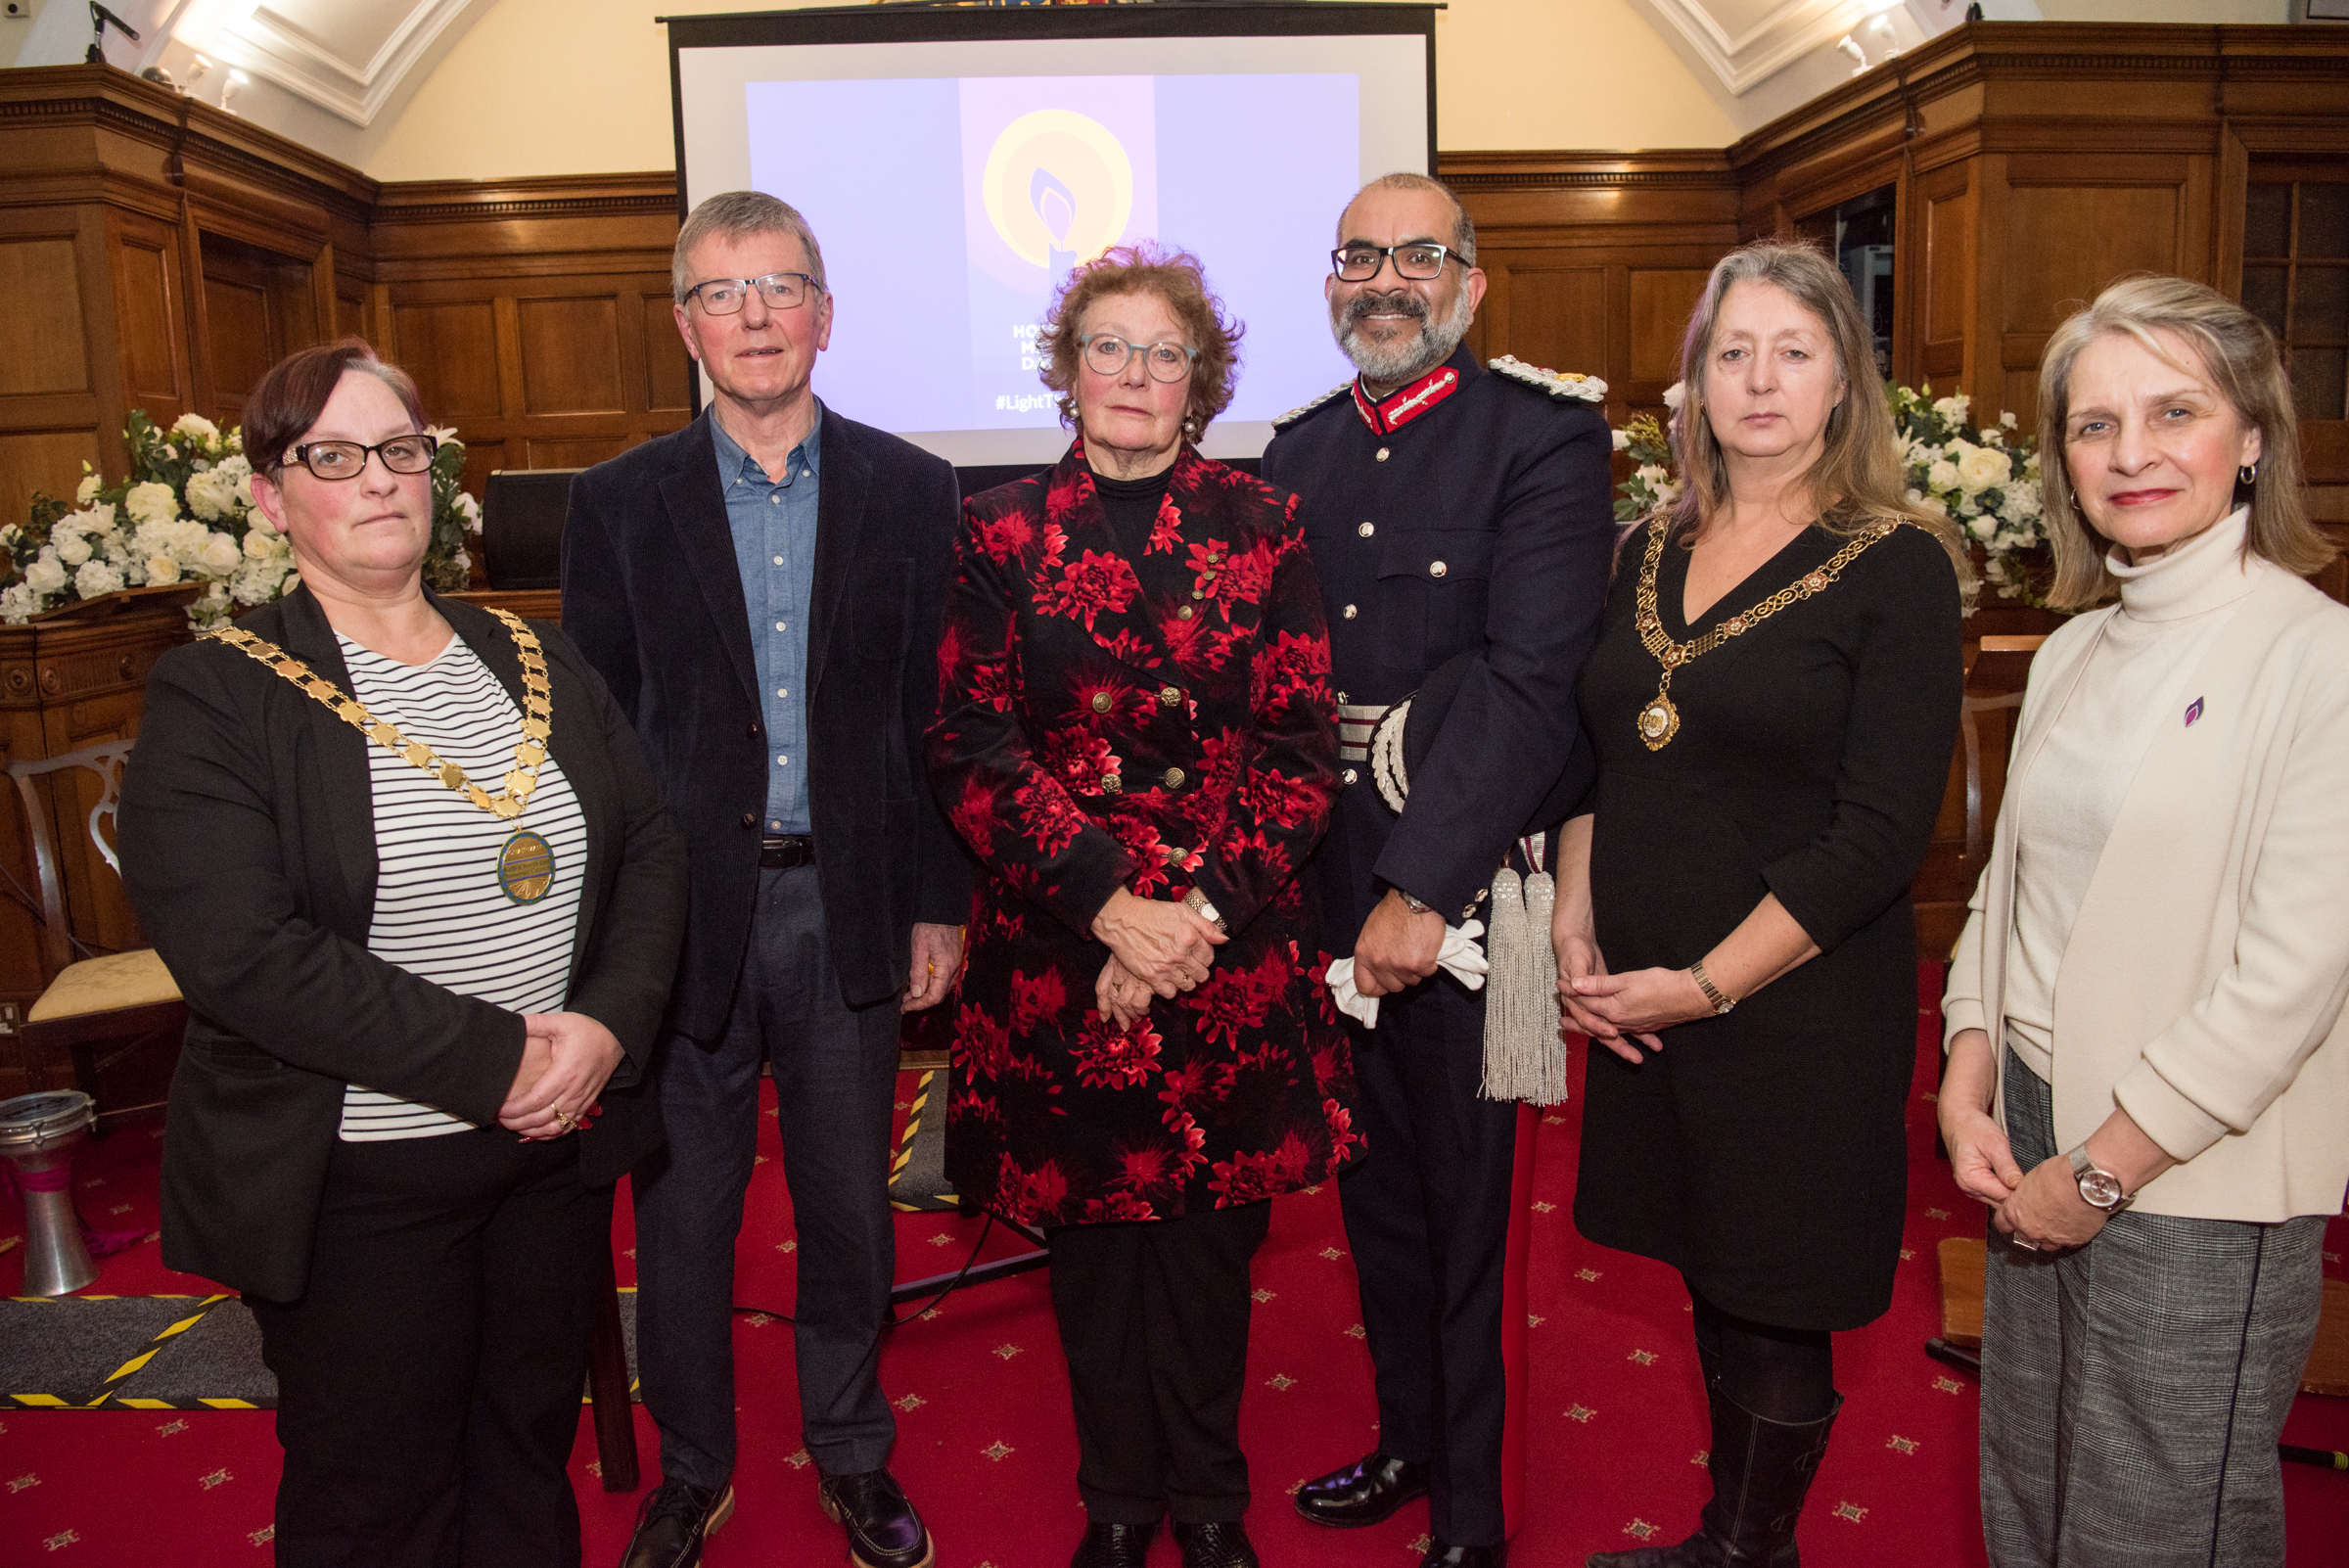 Pictured left to right Councillor Sarah Moore, Chair of Bath & North East Somerset Council Chair of Bath Interfaith Group David Musgrave, Yolanda Ropschitz-Bentham,  Mr Mohammed Saddiq, His Majesty’s Lord-Lieutenant of Somerset, Councillor Dine Romero, the Mayor of Bath and MP for Bath Wera Hobhouse.   